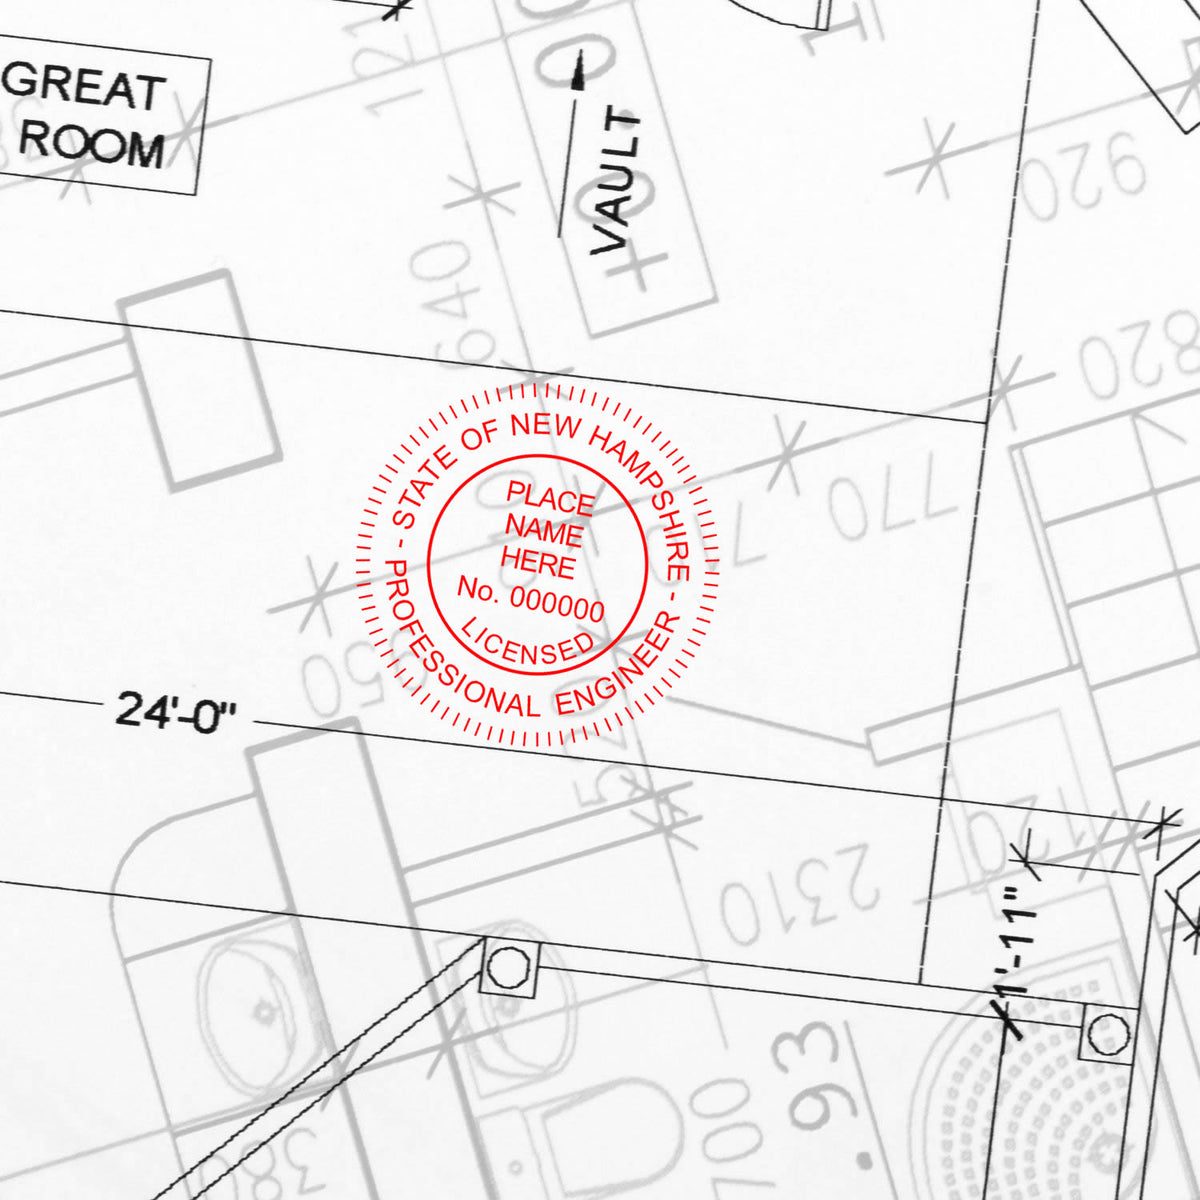 Another Example of a stamped impression of the Premium MaxLight Pre-Inked New Hampshire Engineering Stamp on a piece of office paper.